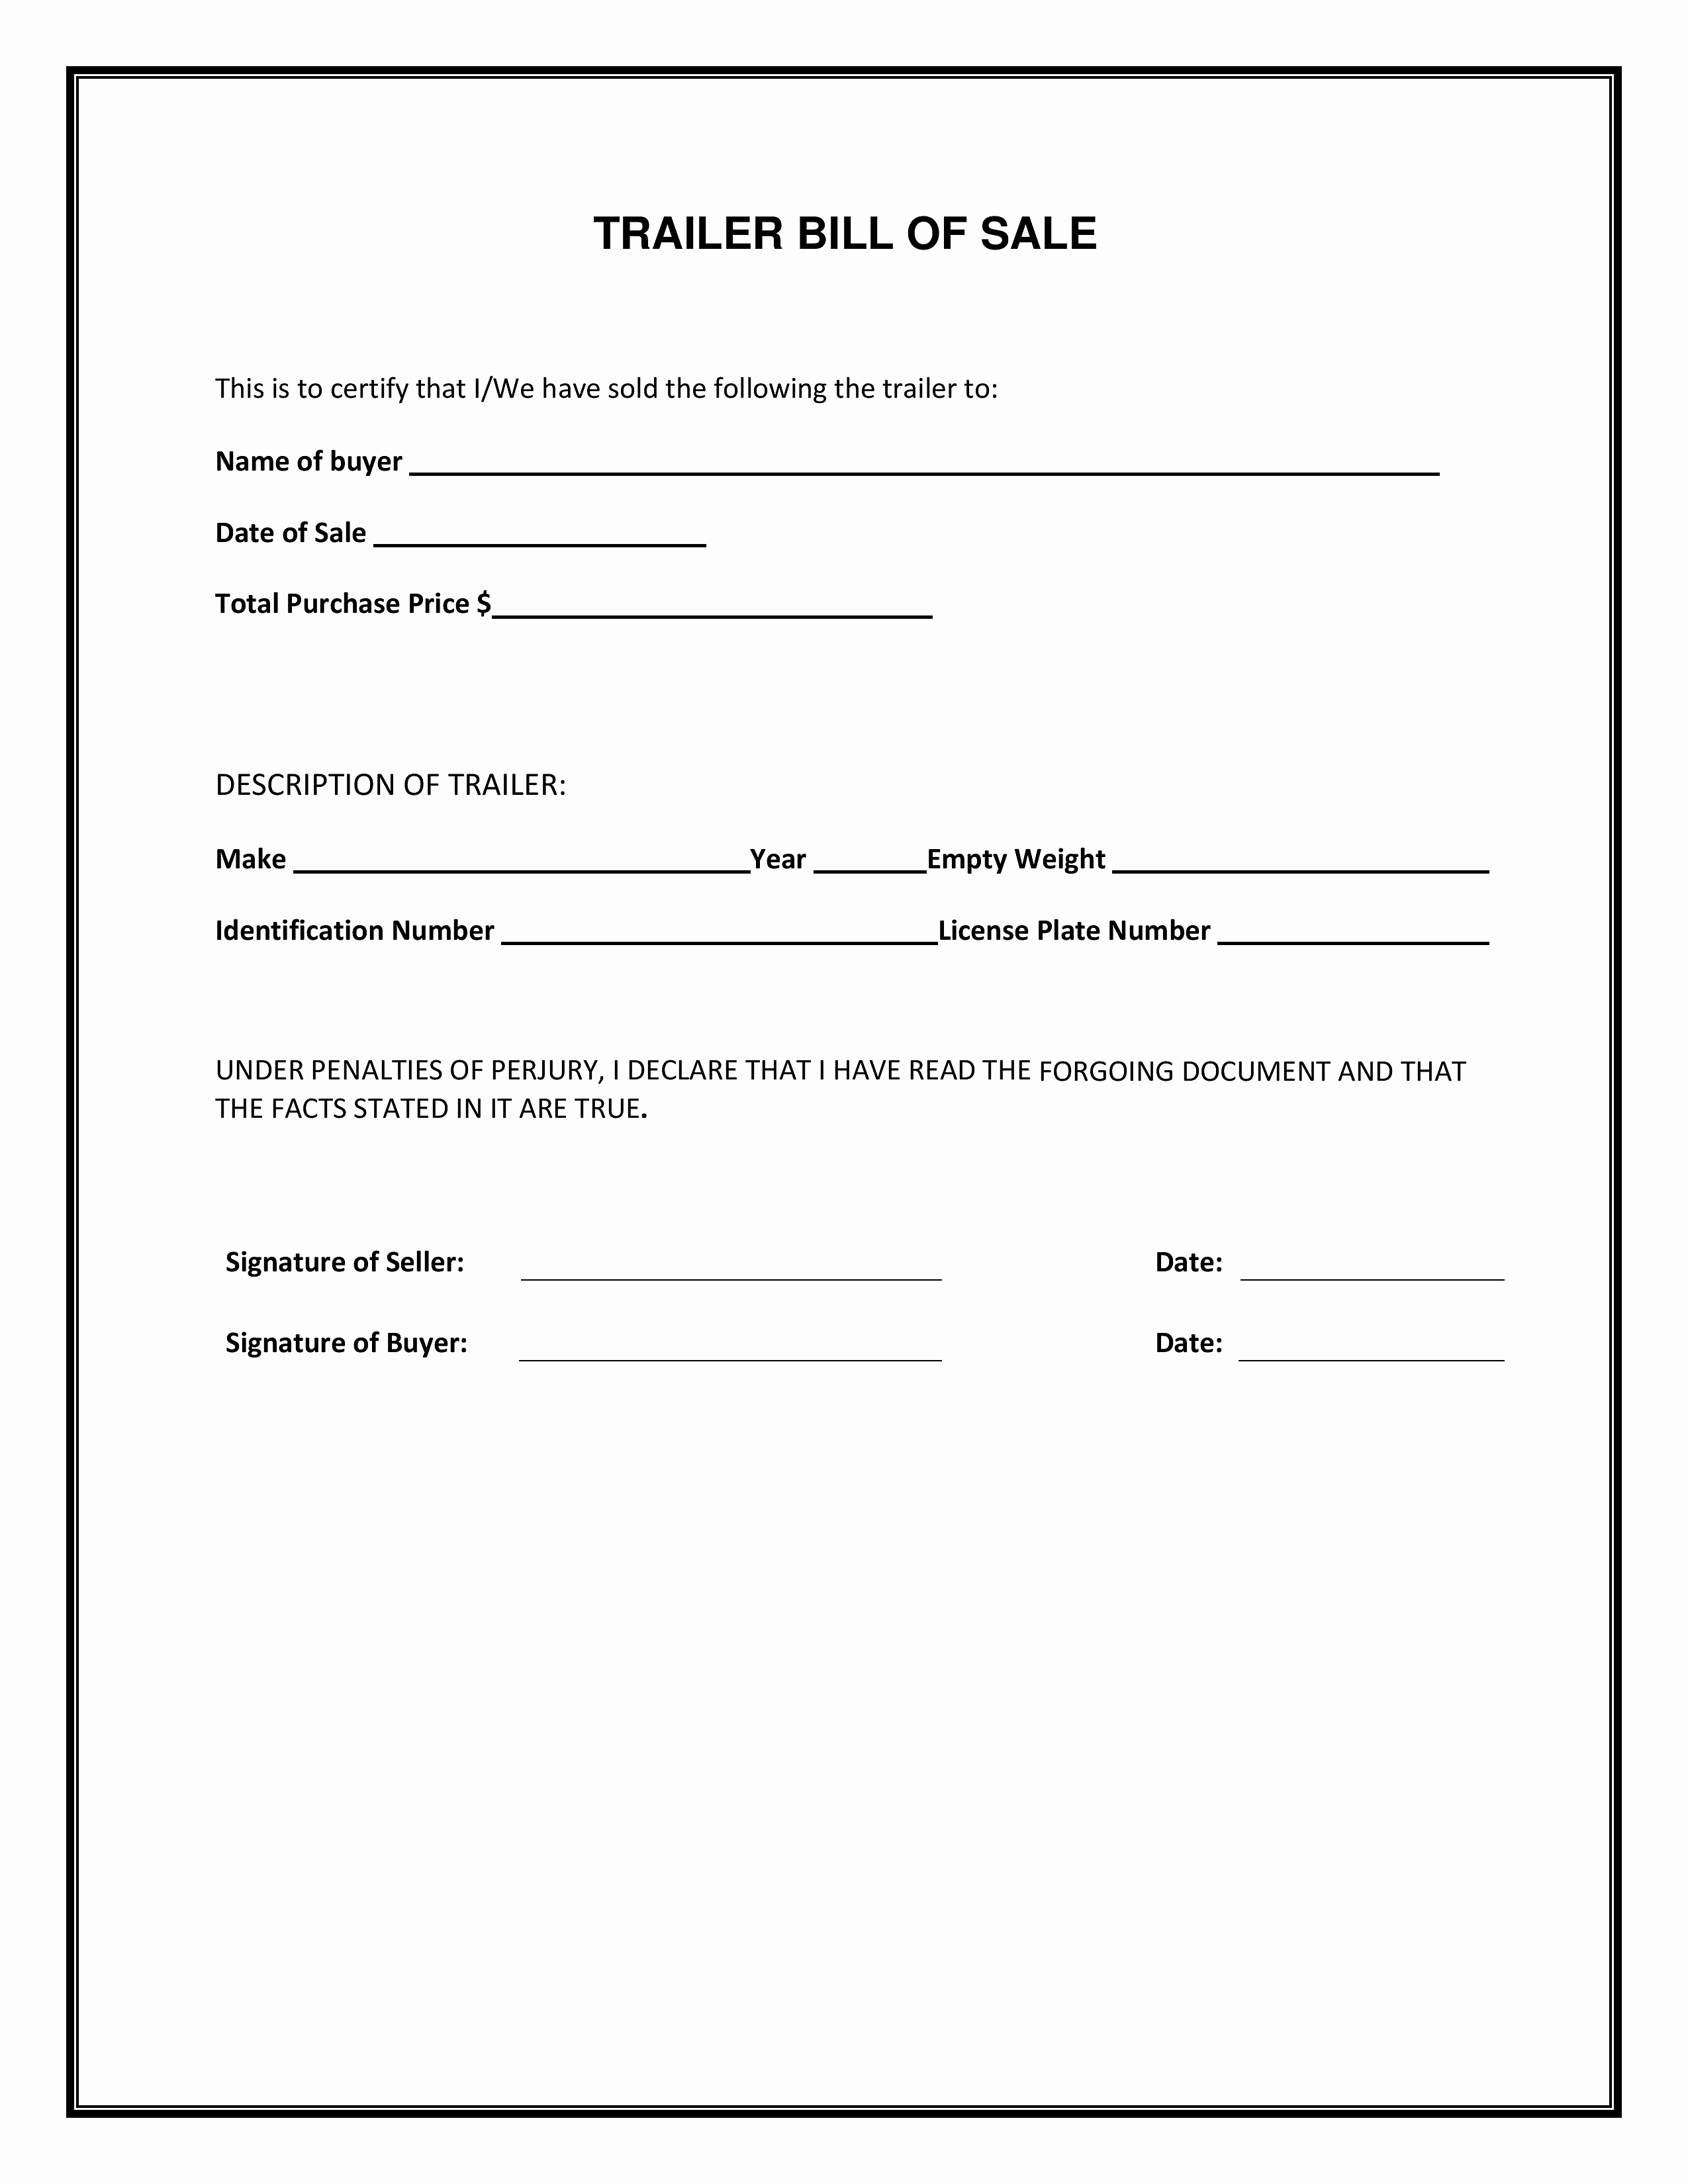 Bill Of Sale Example form Elegant Free Bill Sale forms Pdf Template form Download Trailer